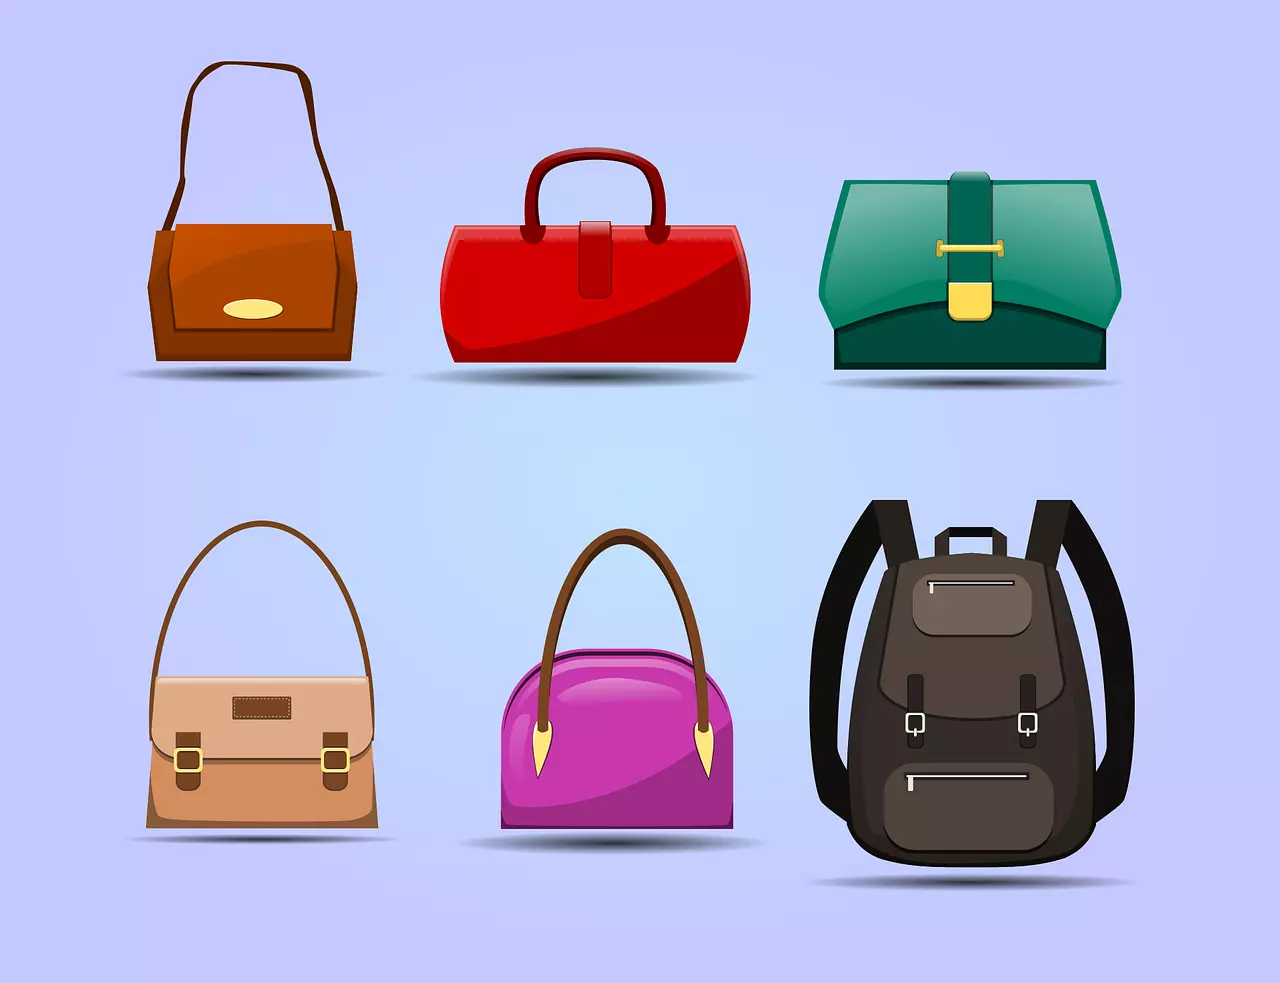 The 9 most commonly used types of women's handbags